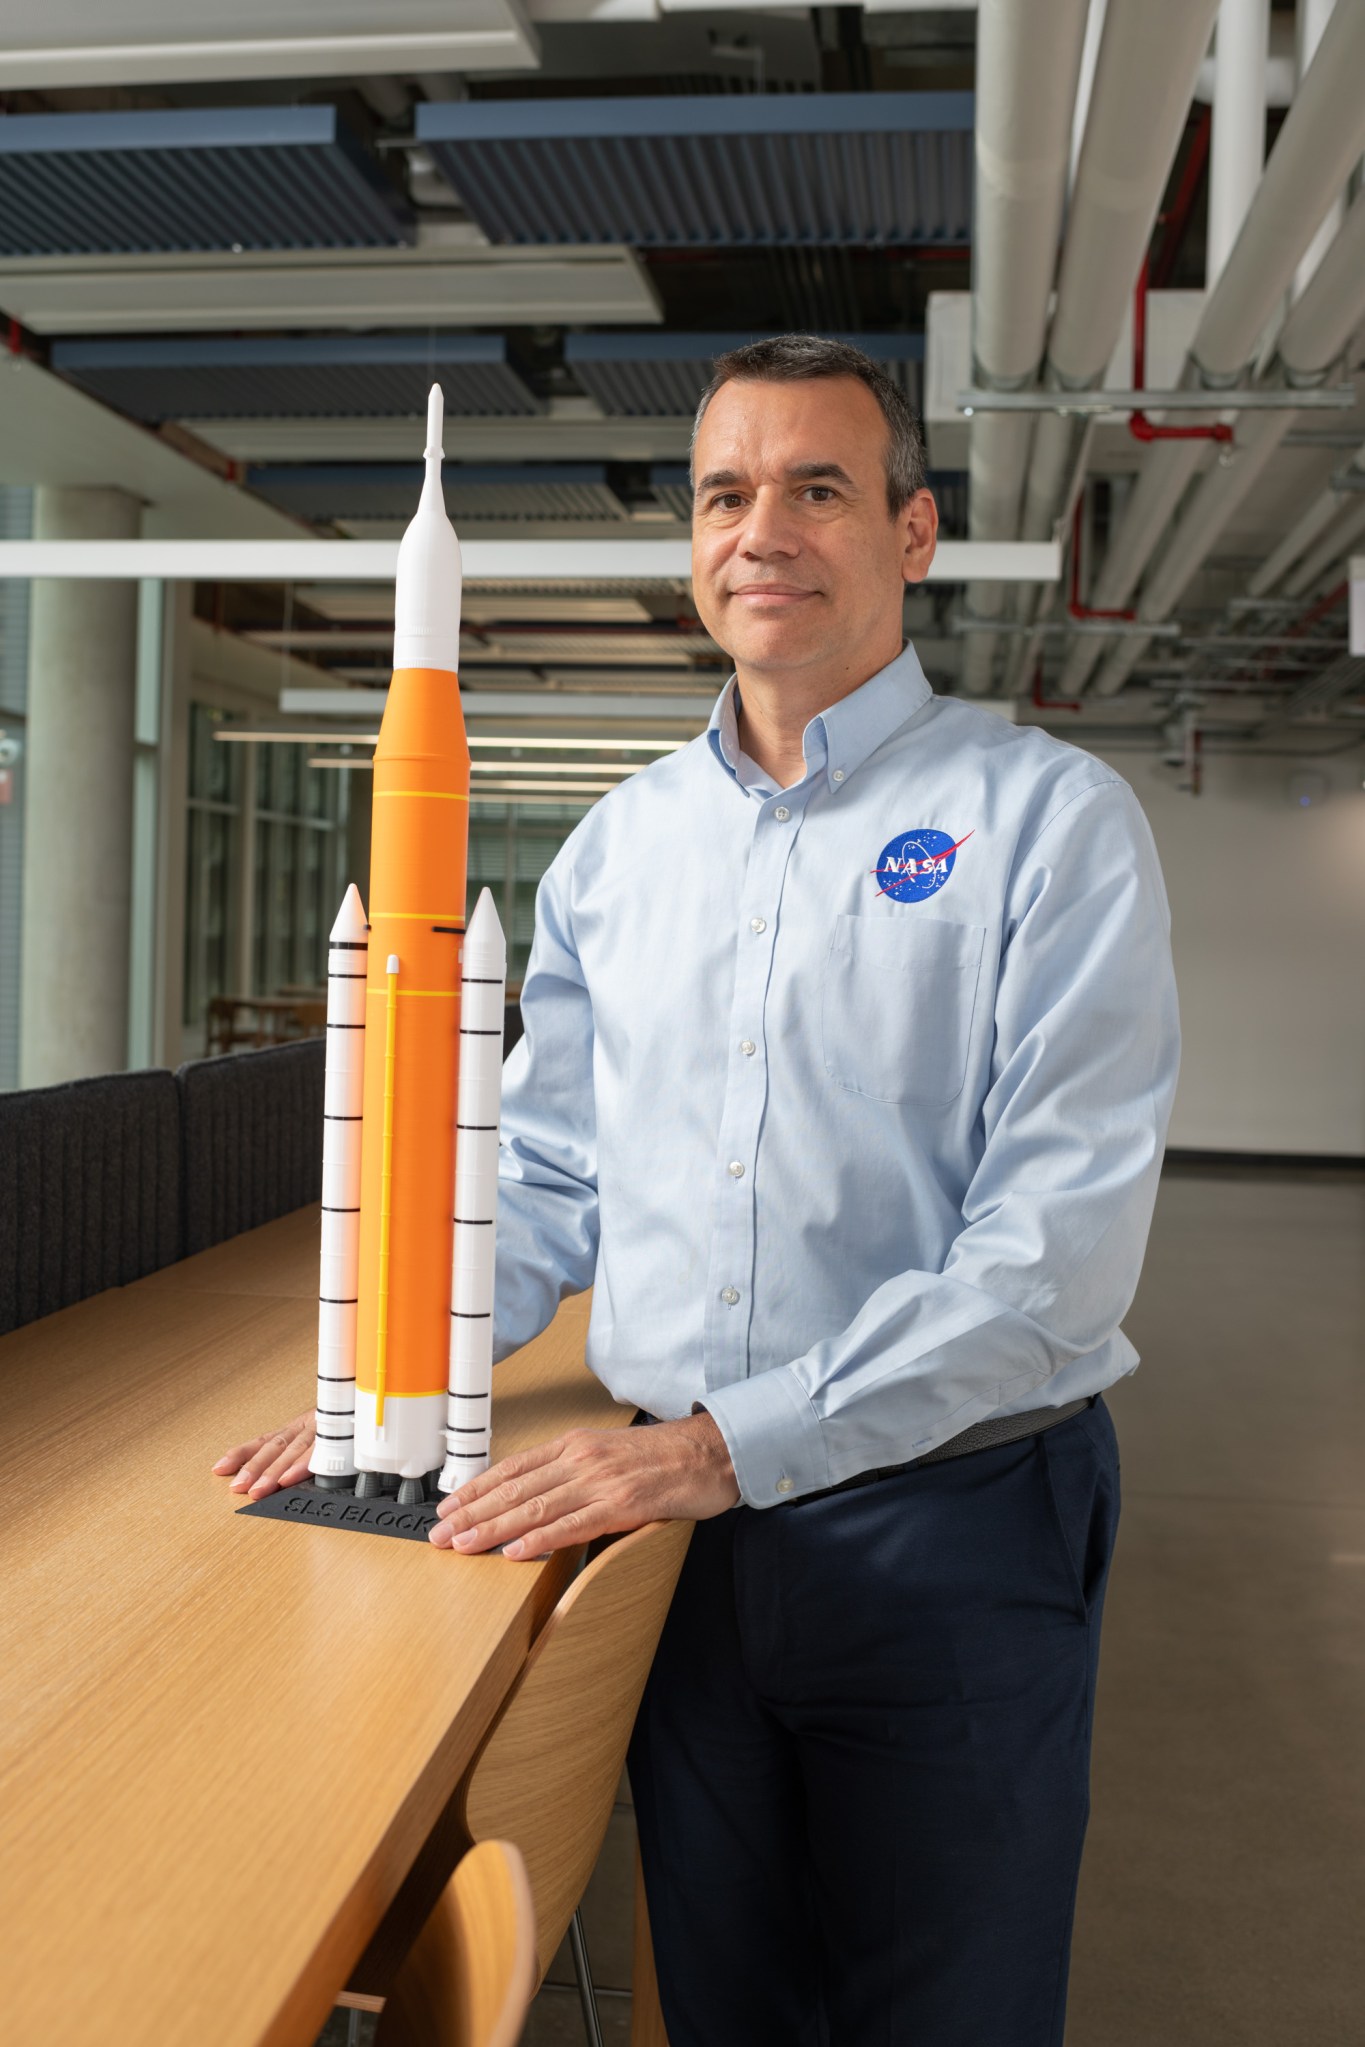 Nelson Morales poses next to a small model of NASA’s Space Launch System. He is wearing a blue collared shirt with a NASA logo.